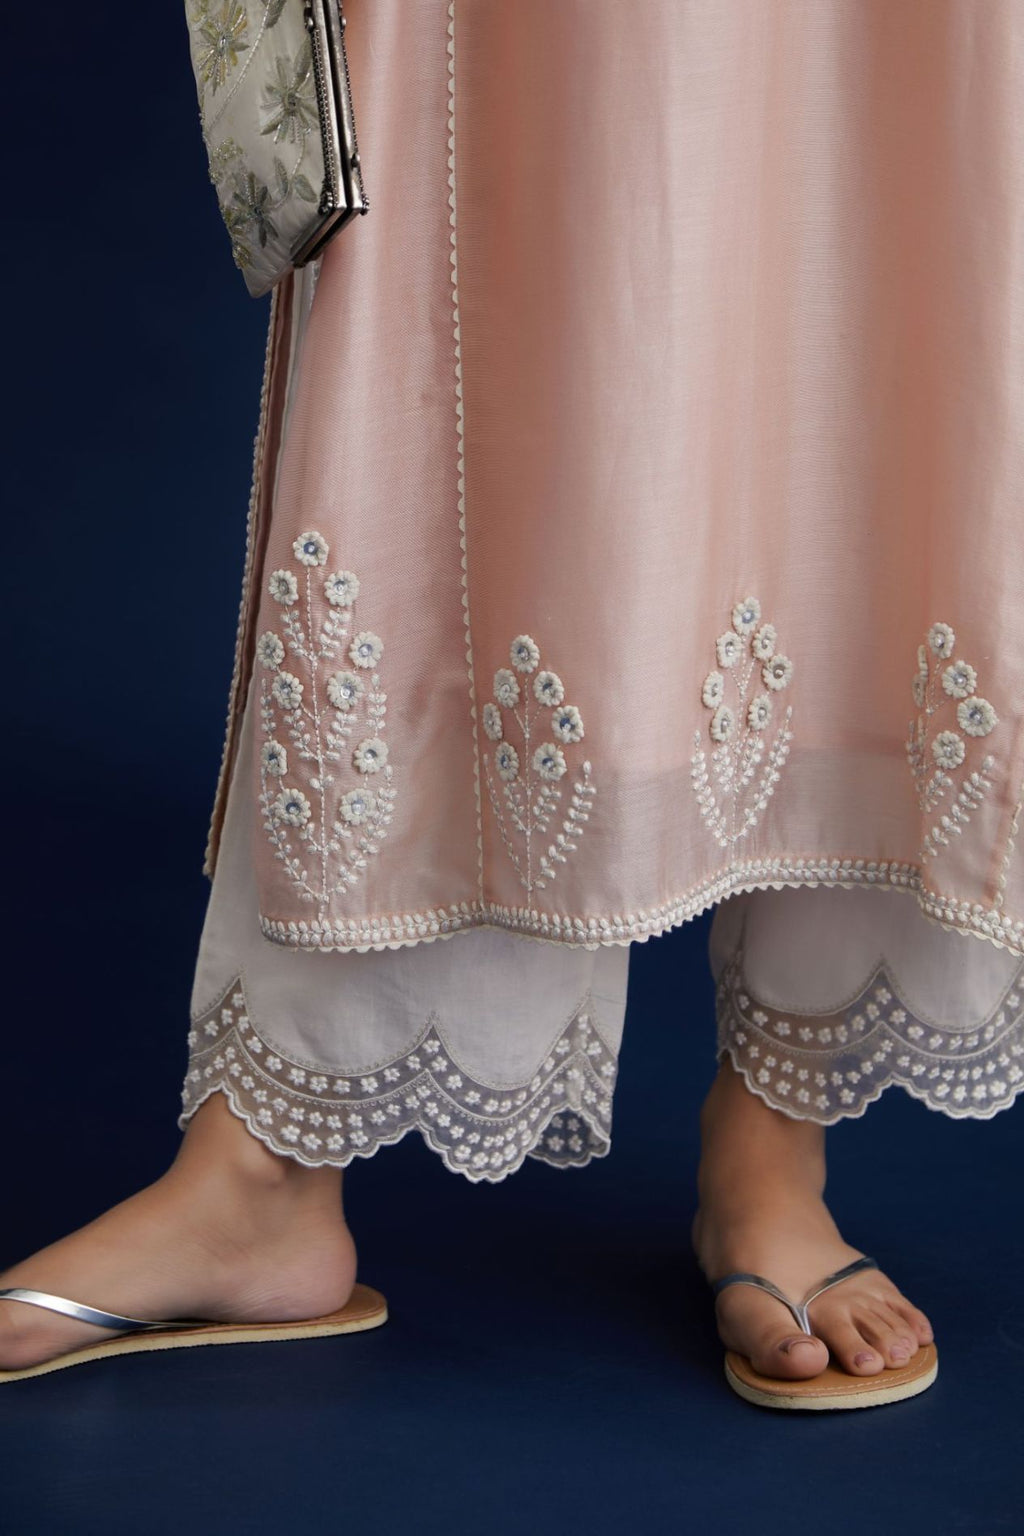 Blush pink straight kurta set with off white embroidery and button placket neckline in front